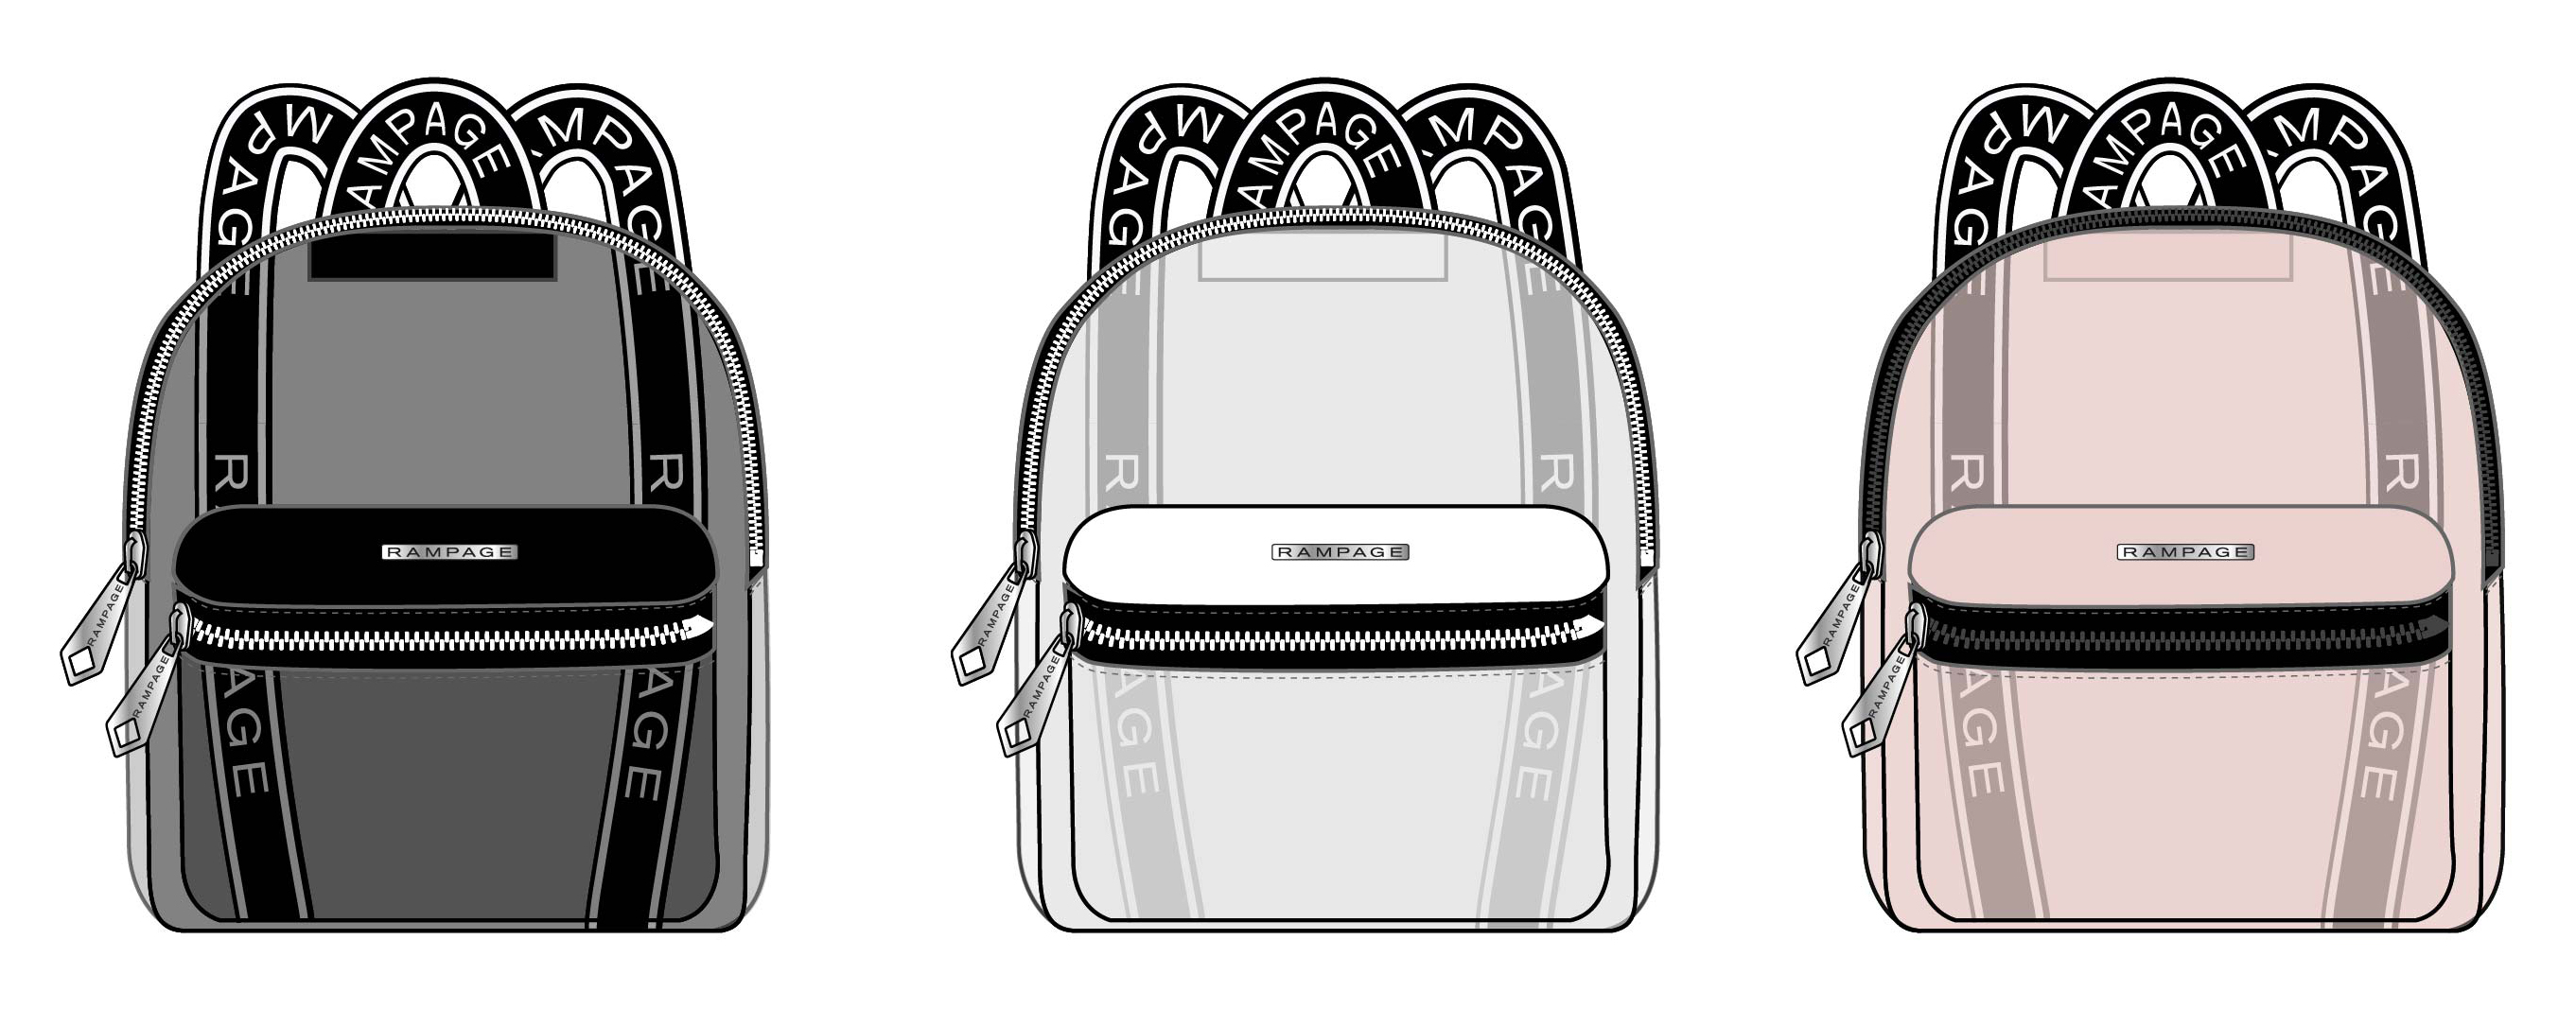 ''12'''' Rampage Jelly Clear Midi BACKPACKs''